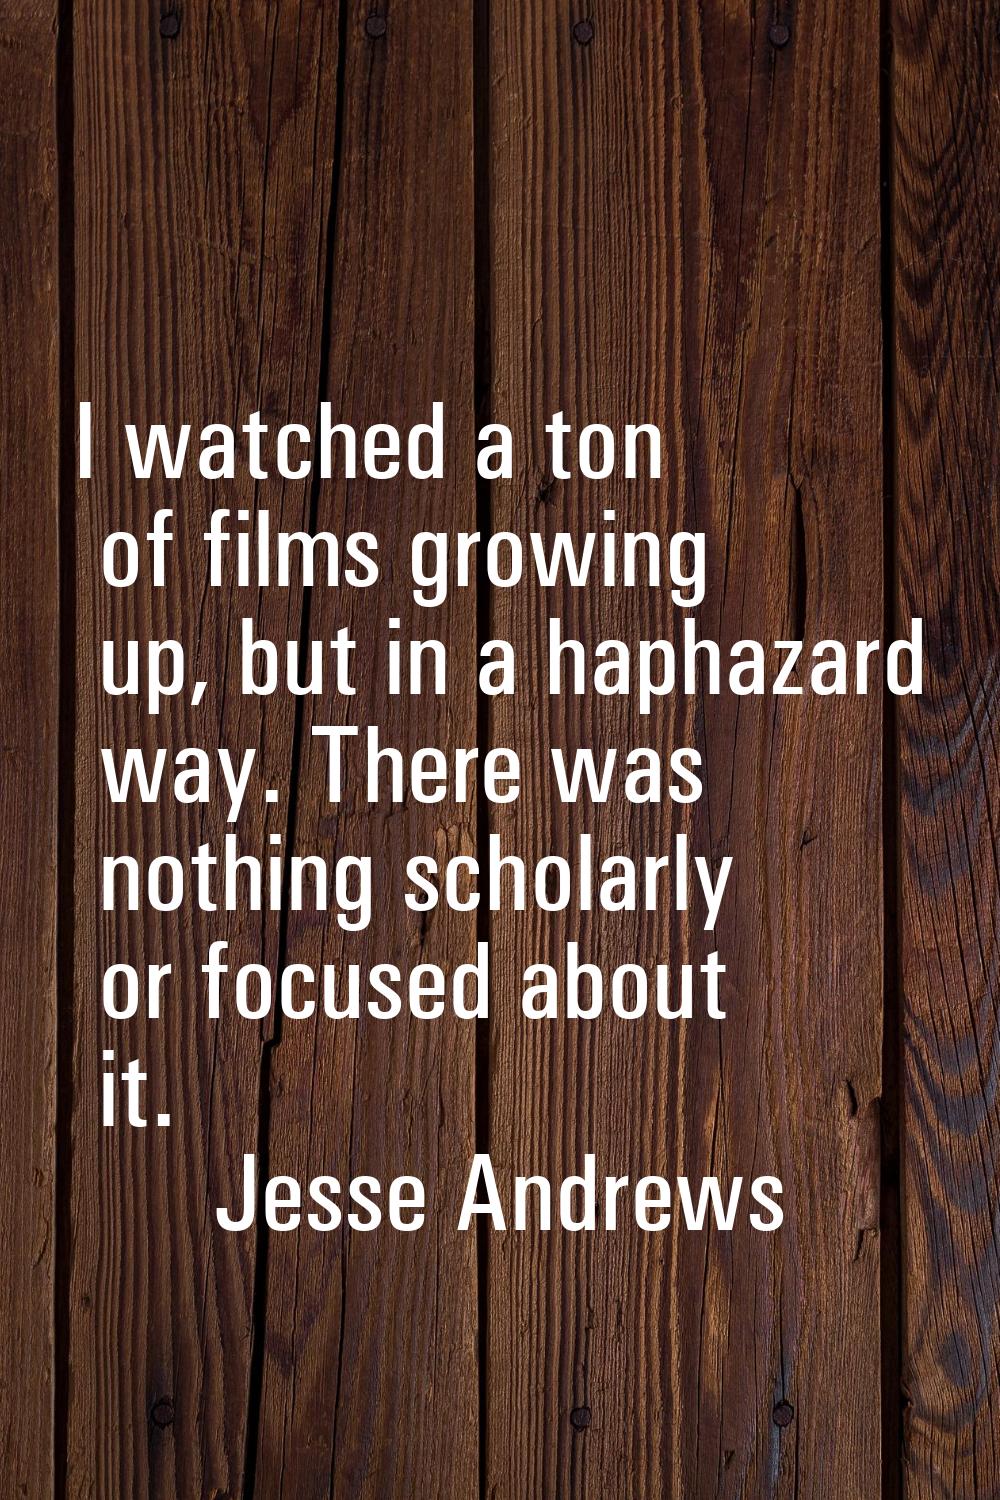 I watched a ton of films growing up, but in a haphazard way. There was nothing scholarly or focused